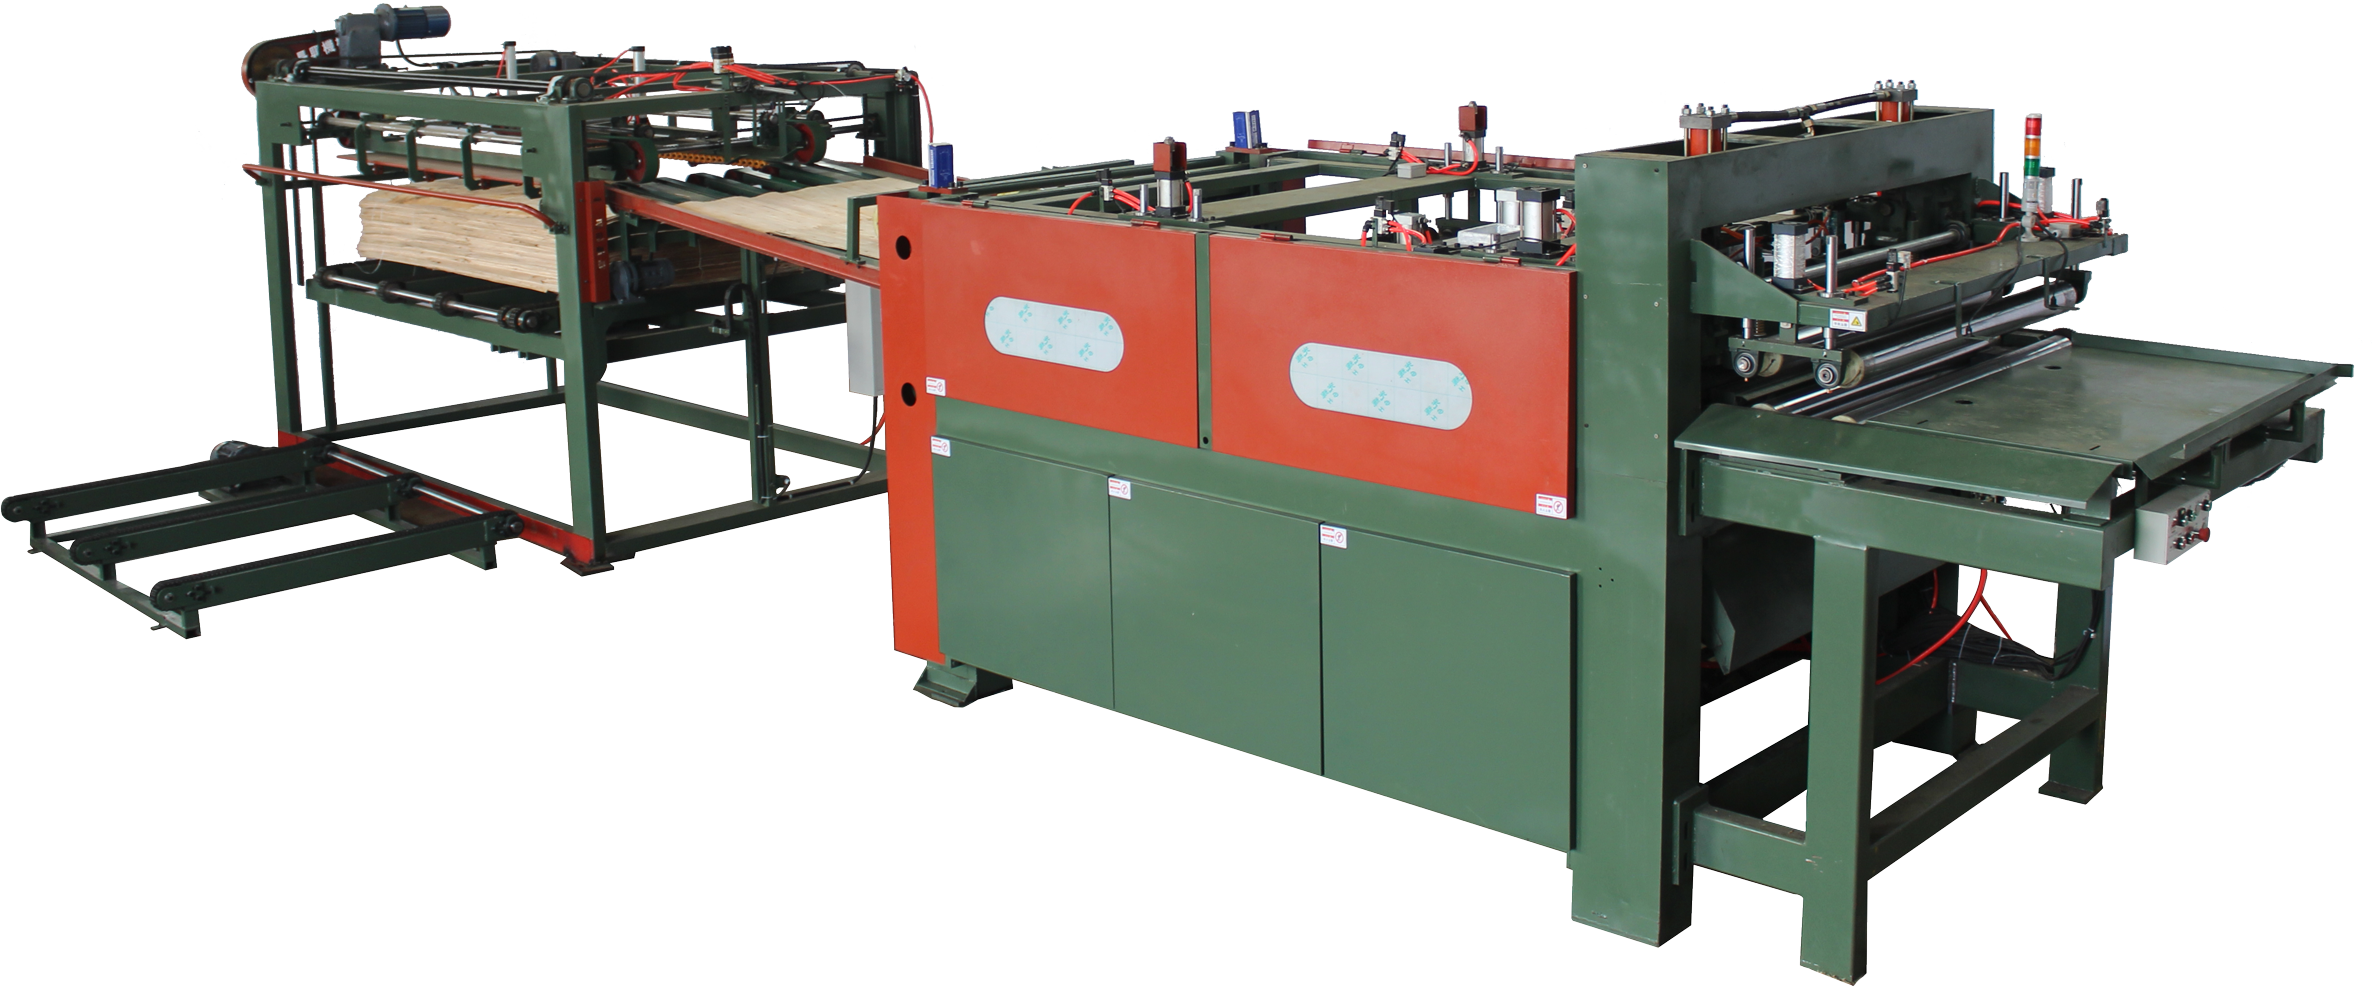 Changxing 4th Generation Automatic Roller Type Finger Jointer 